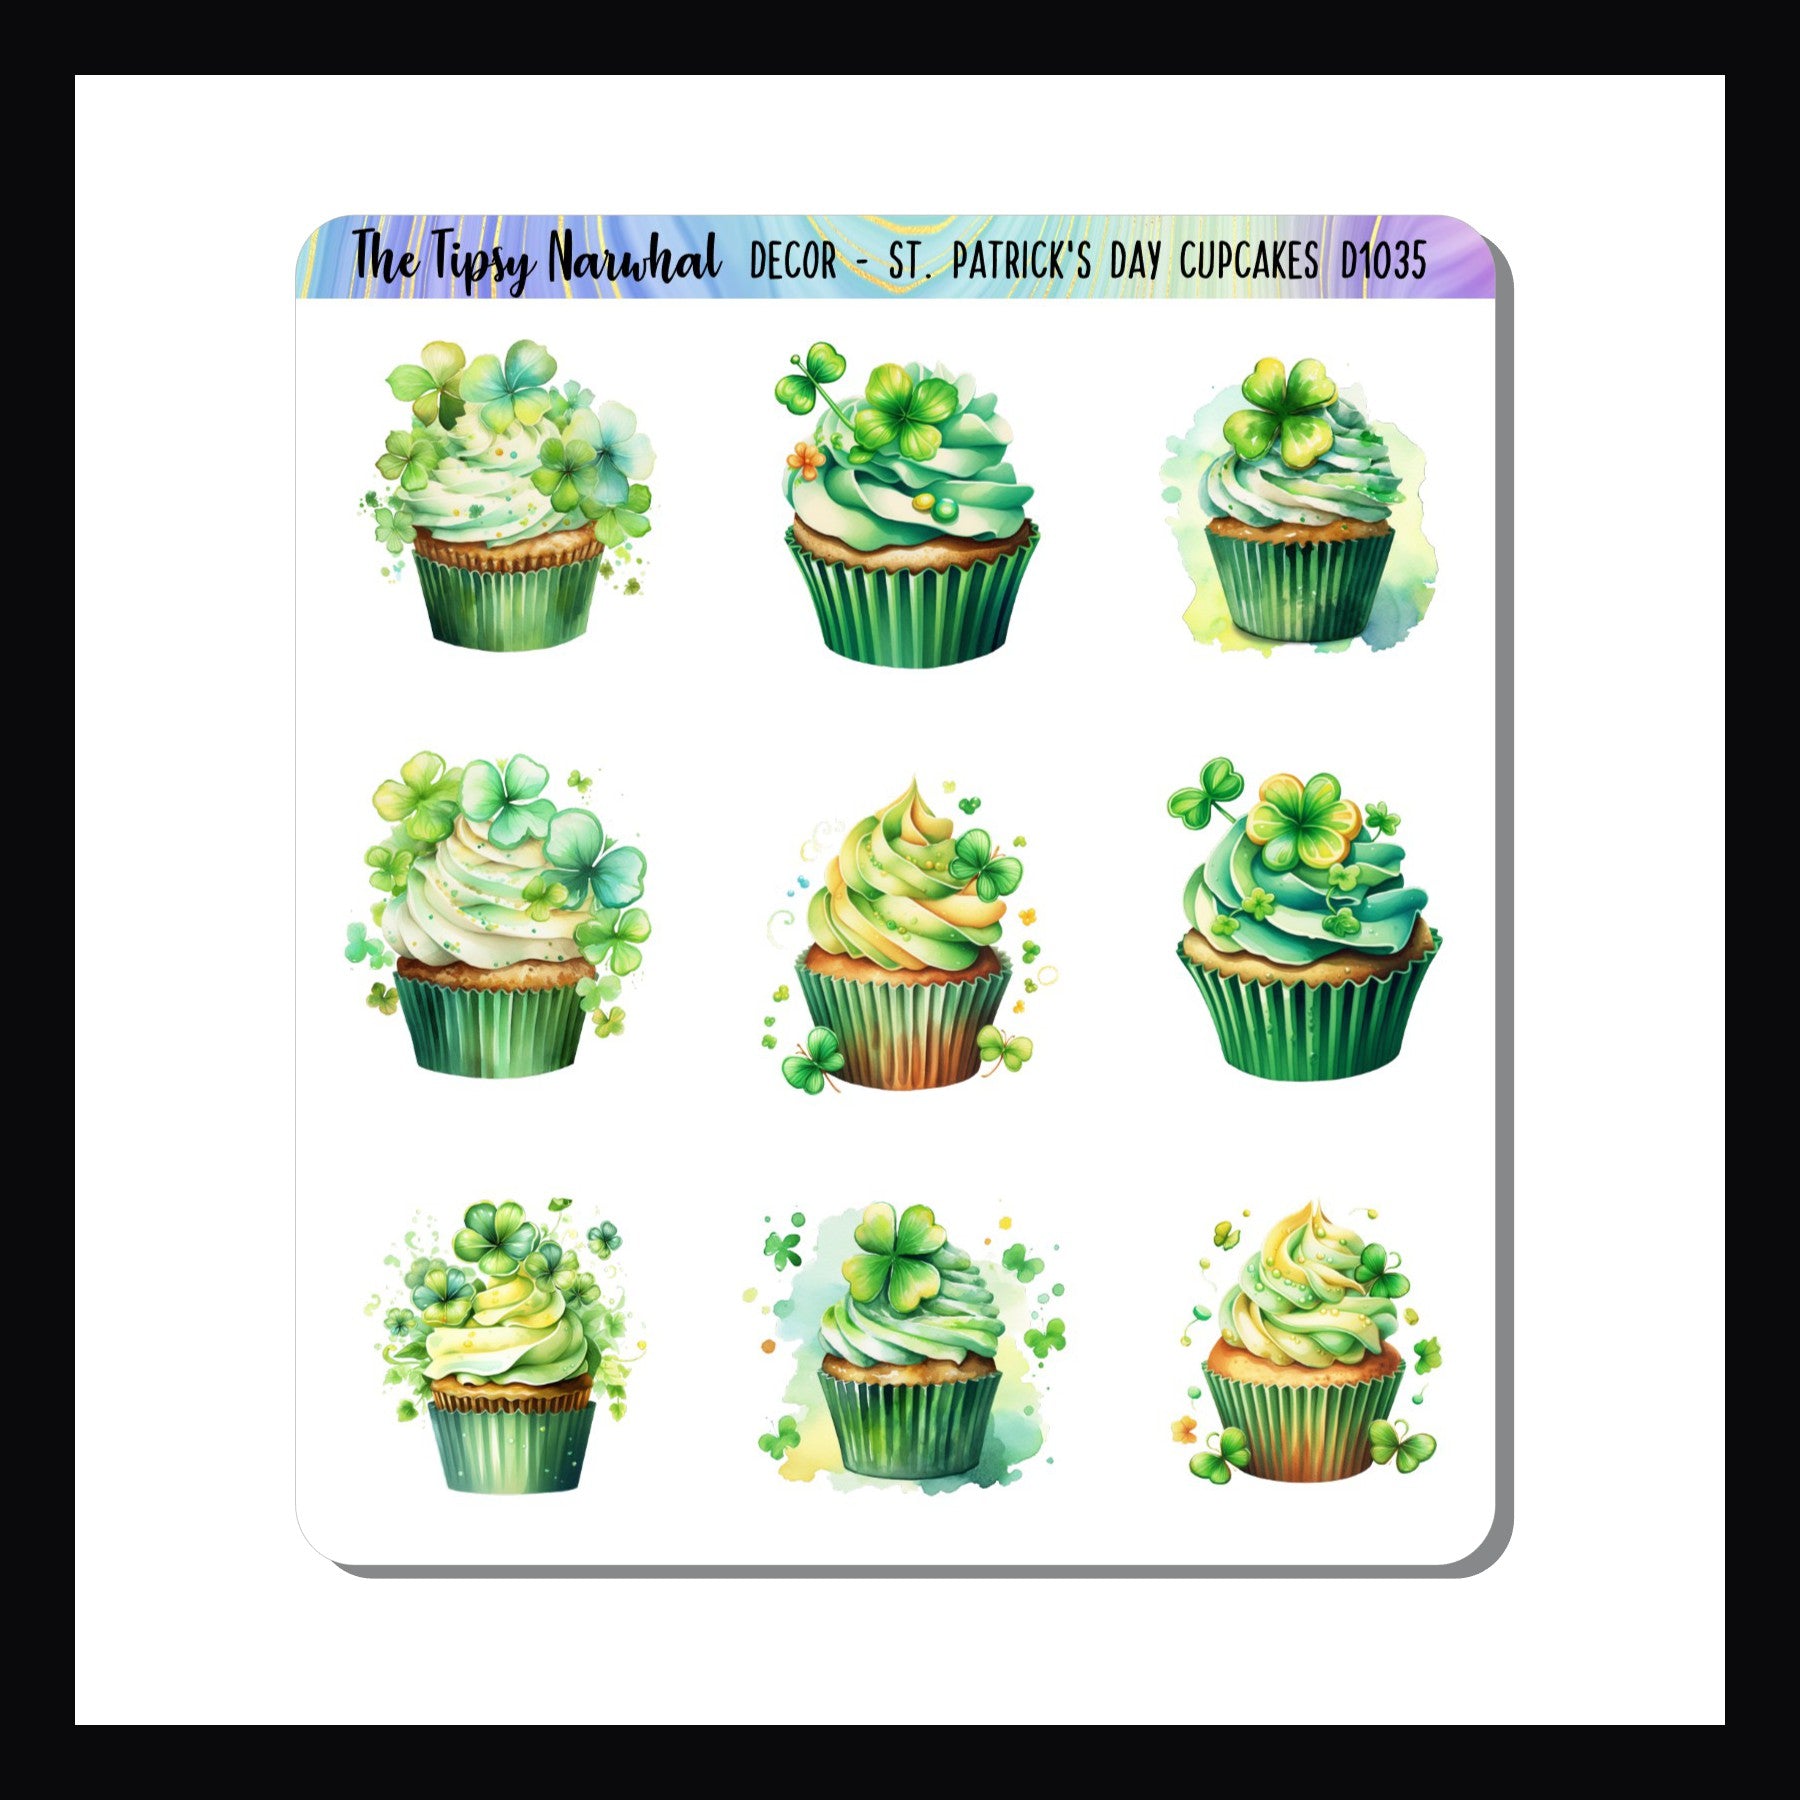 St Patrick's Day Cupcakes Decor Sheet features 9 different cupcake stickers.  Each cupcake decorated in green frosting with various 4 leaf clovers.